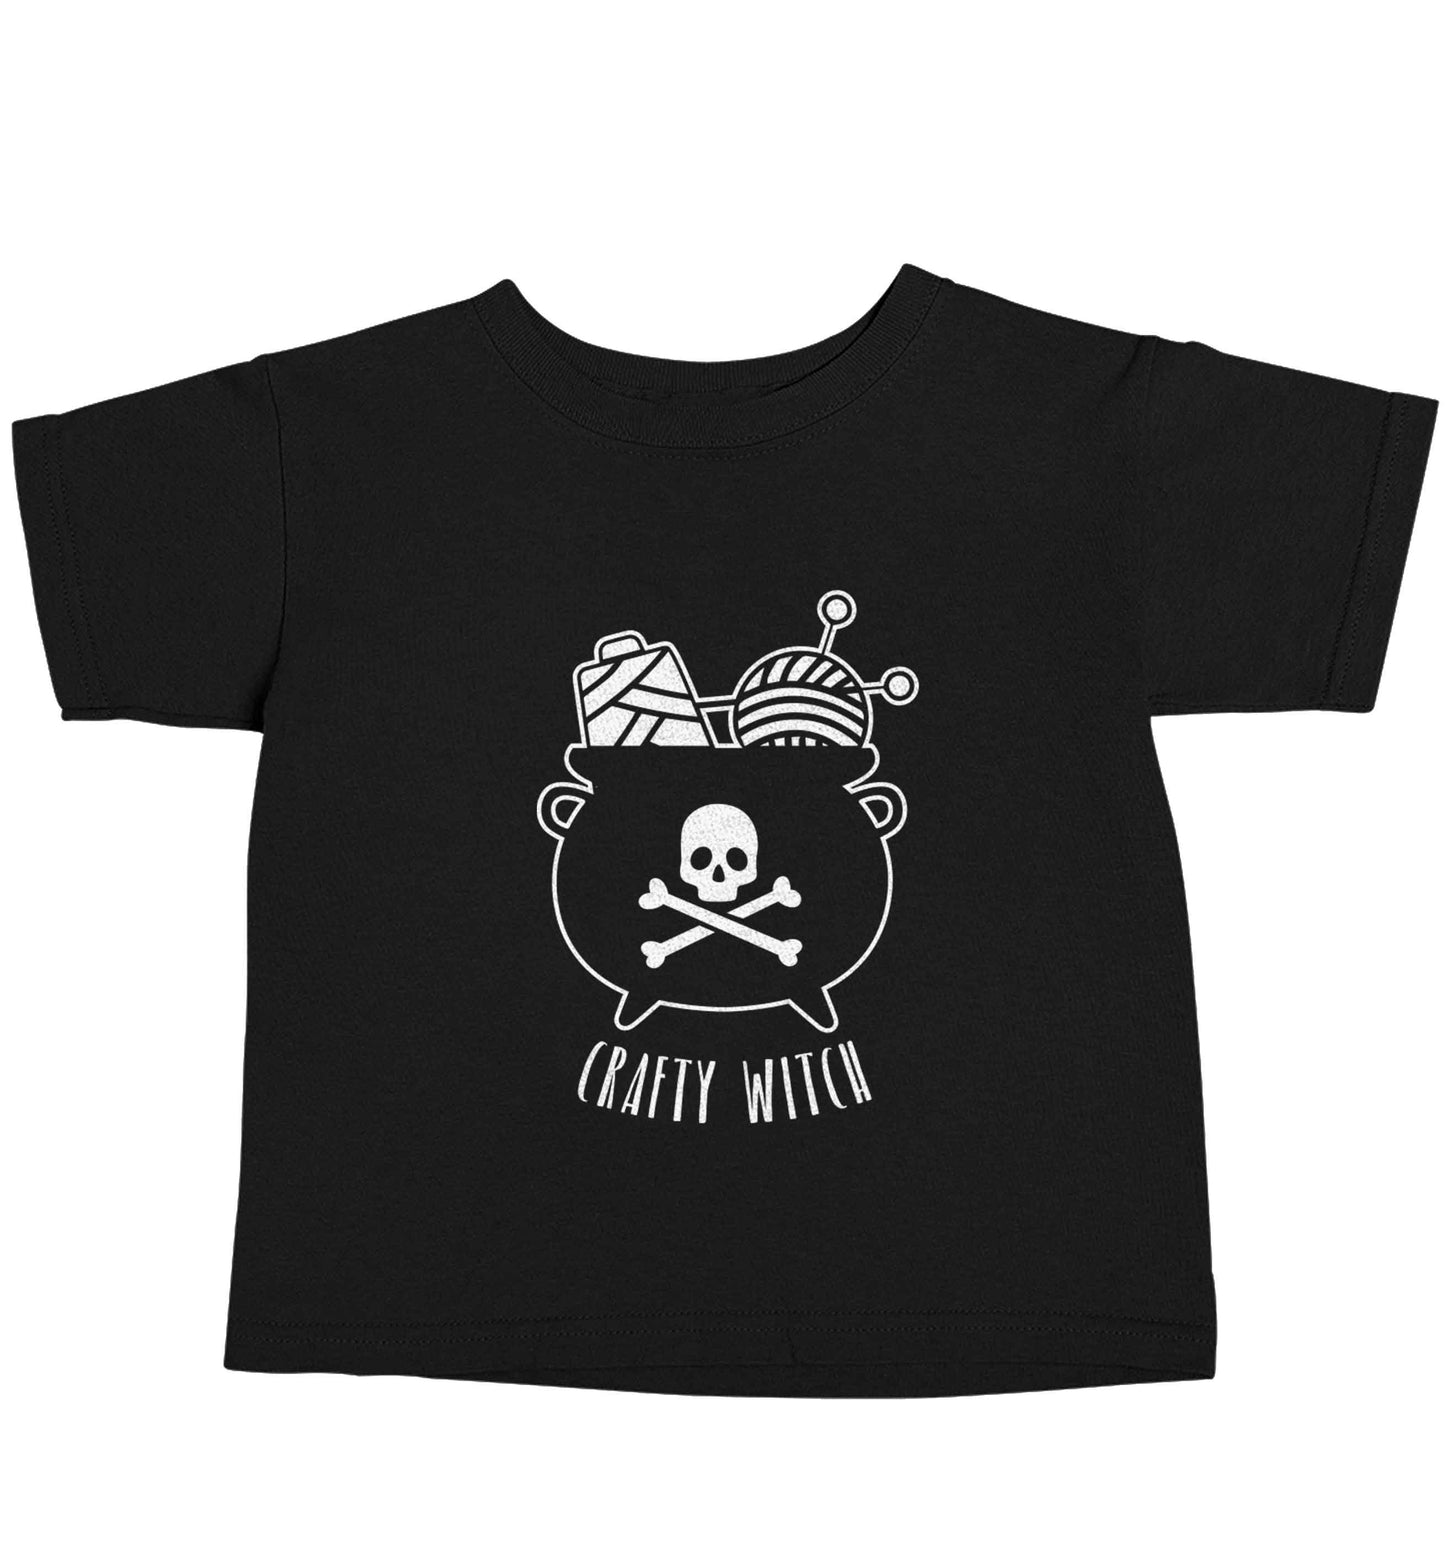 Crafty witch Black baby toddler Tshirt 2 years